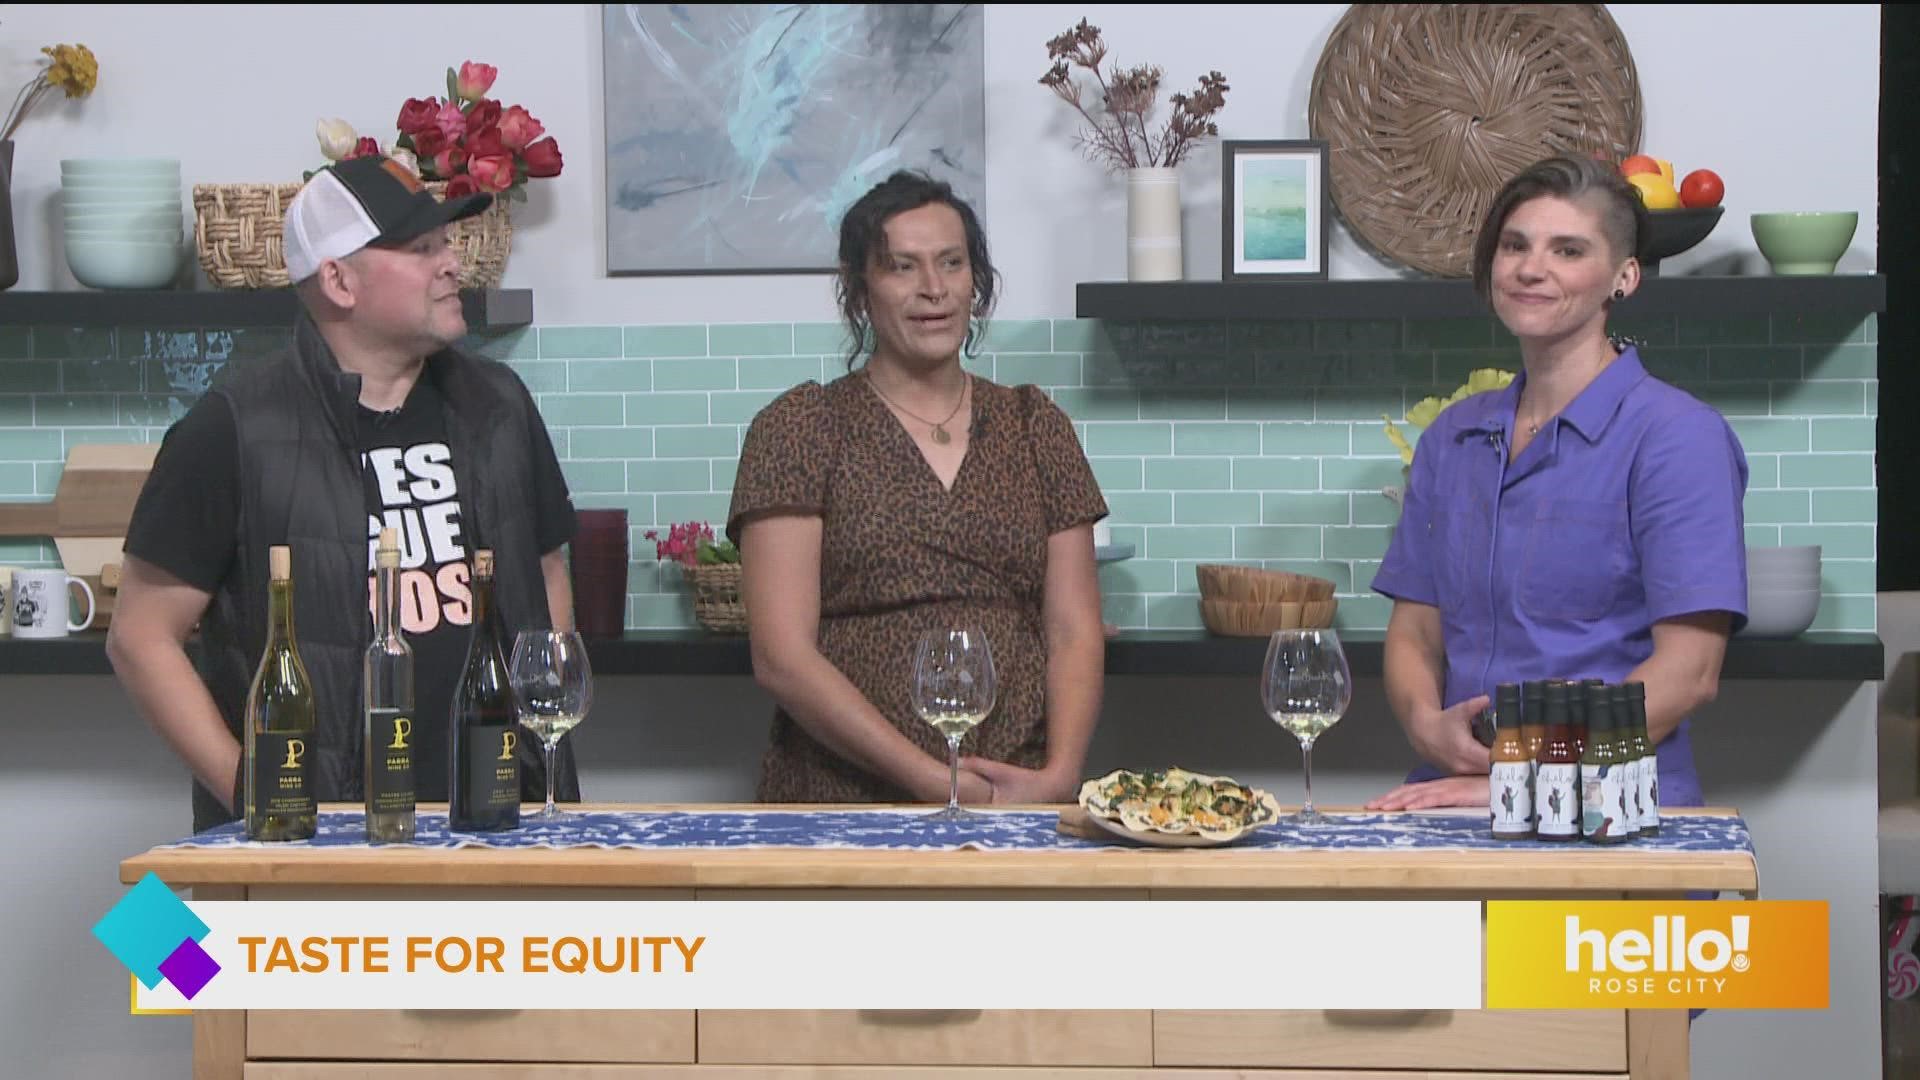 Parra and Contreras are a featured winemaker and chef at the Taste for Equity gala